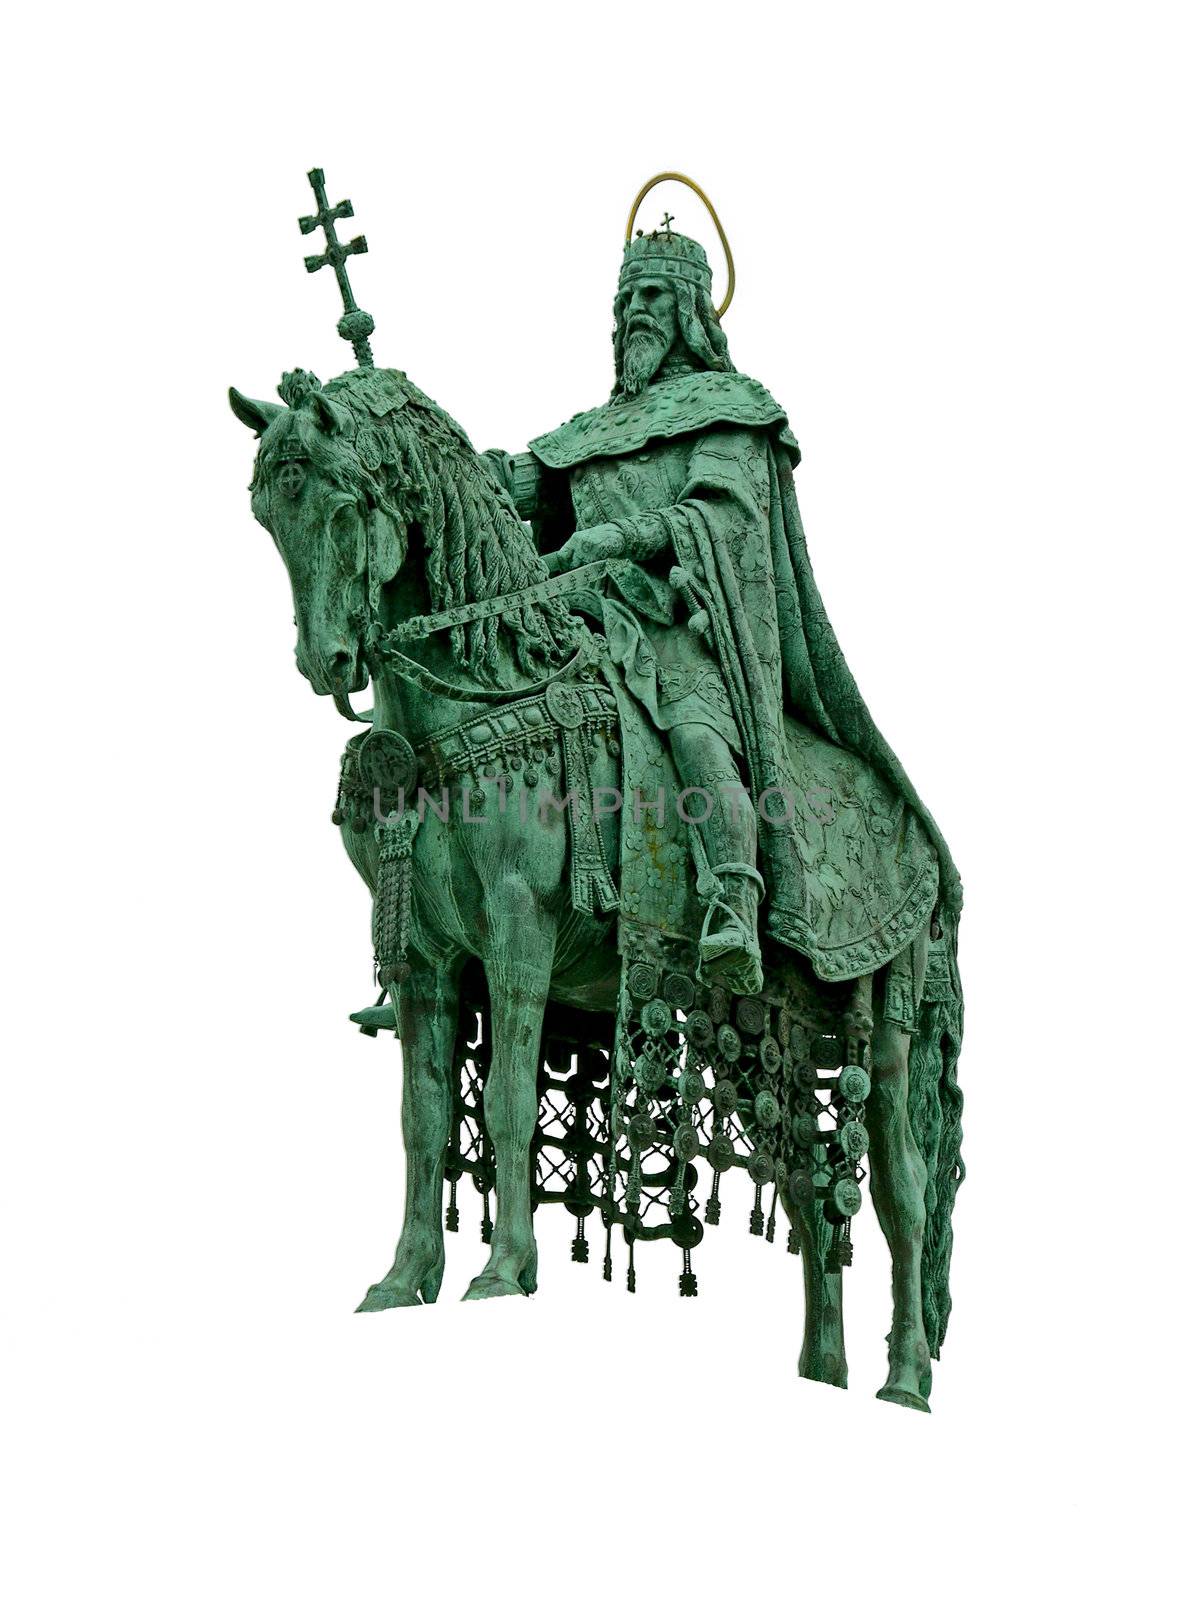 A saint Ishtvan is the first king of Hungary, founder of the state